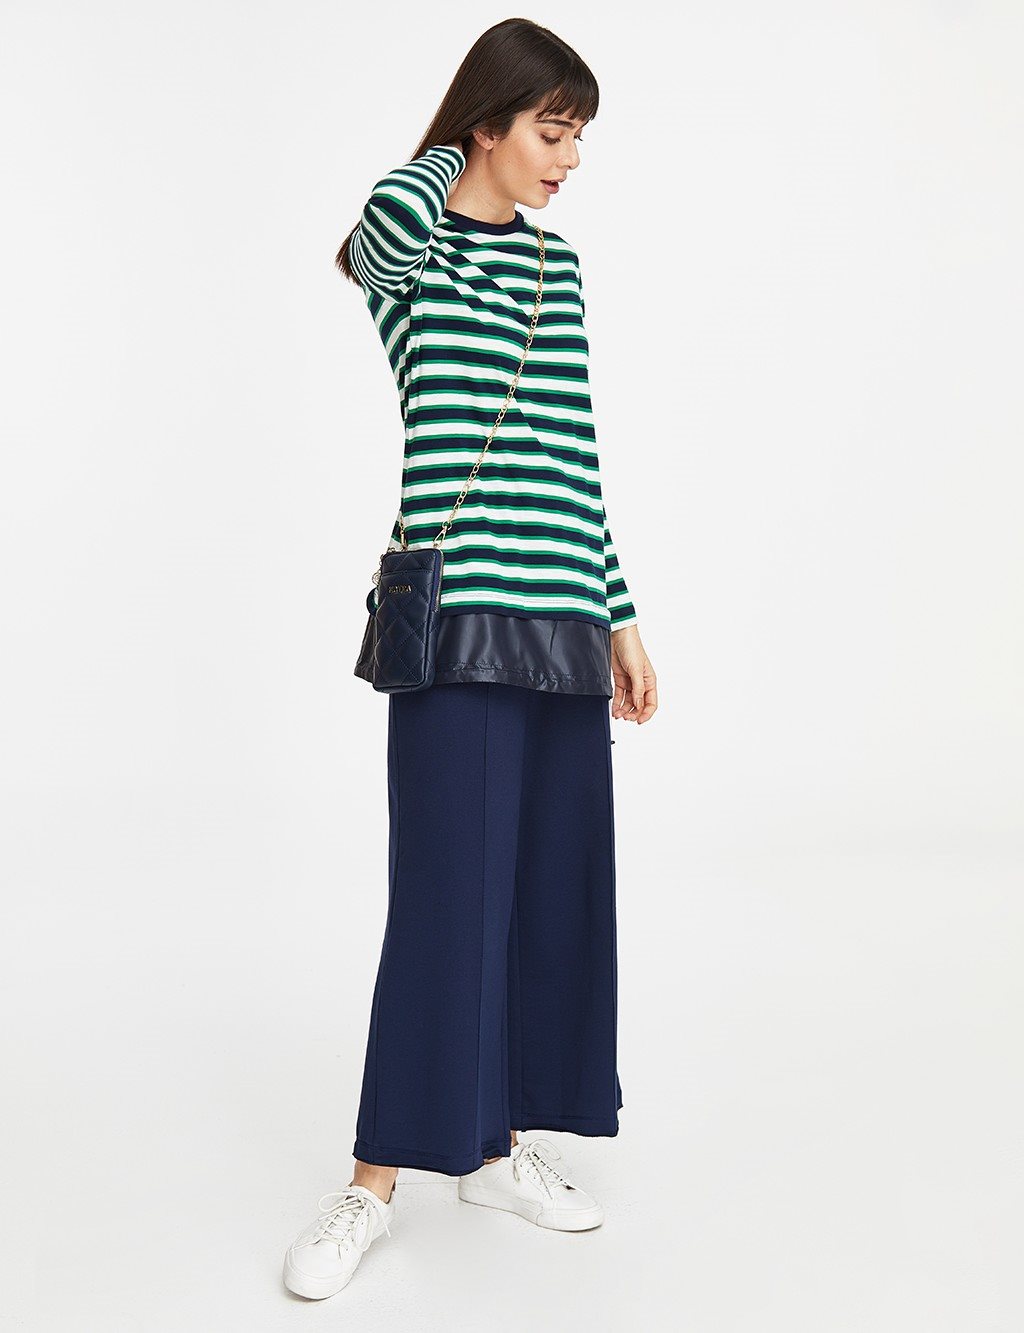 Striped Blouse Navy-Green